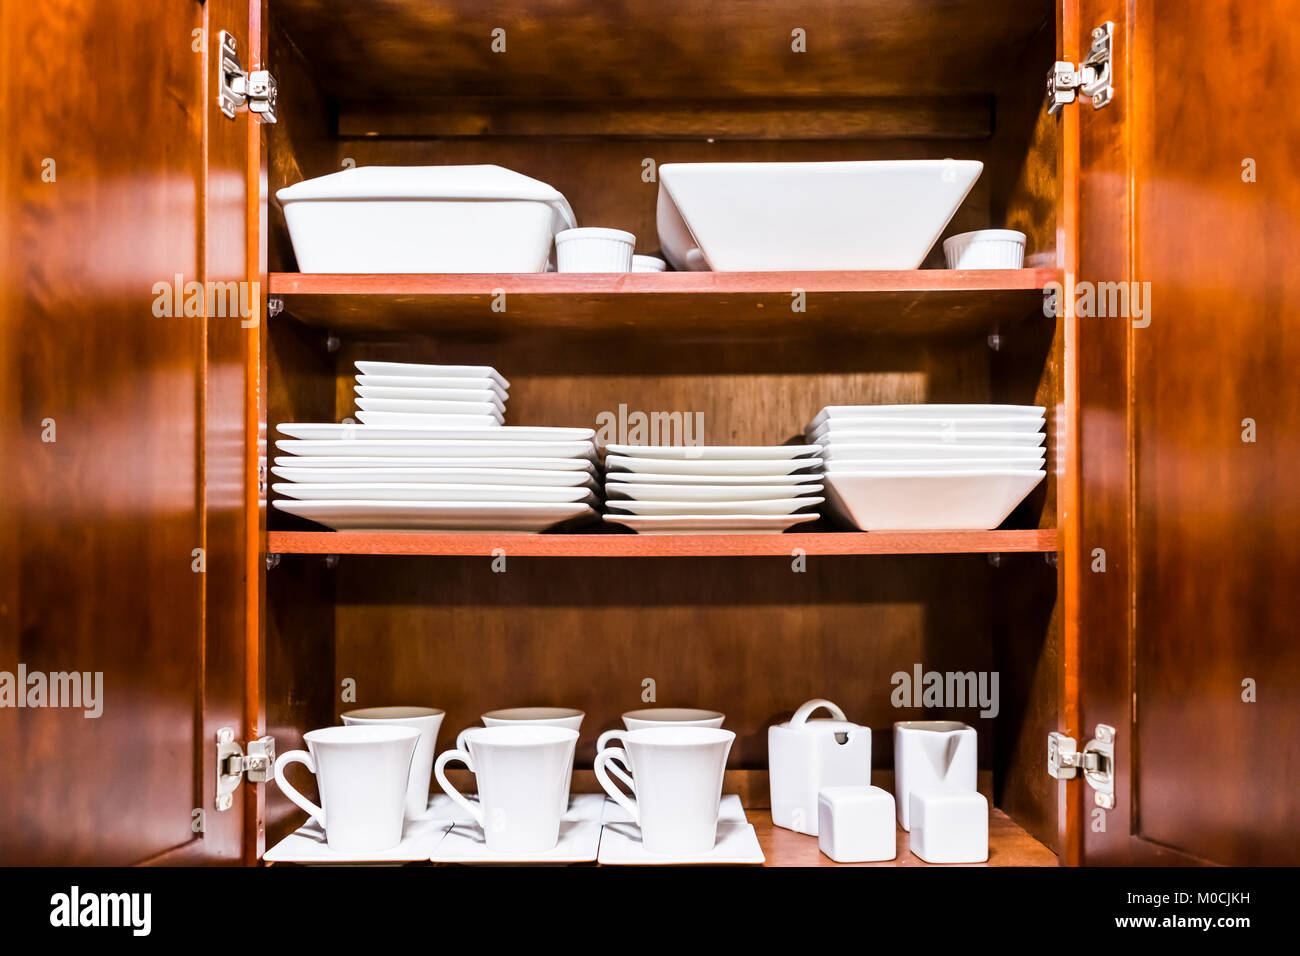 Open wooden kitchen cabinet door cupboard with many white dishes, plates, cups on shelves closeup Stock Photo